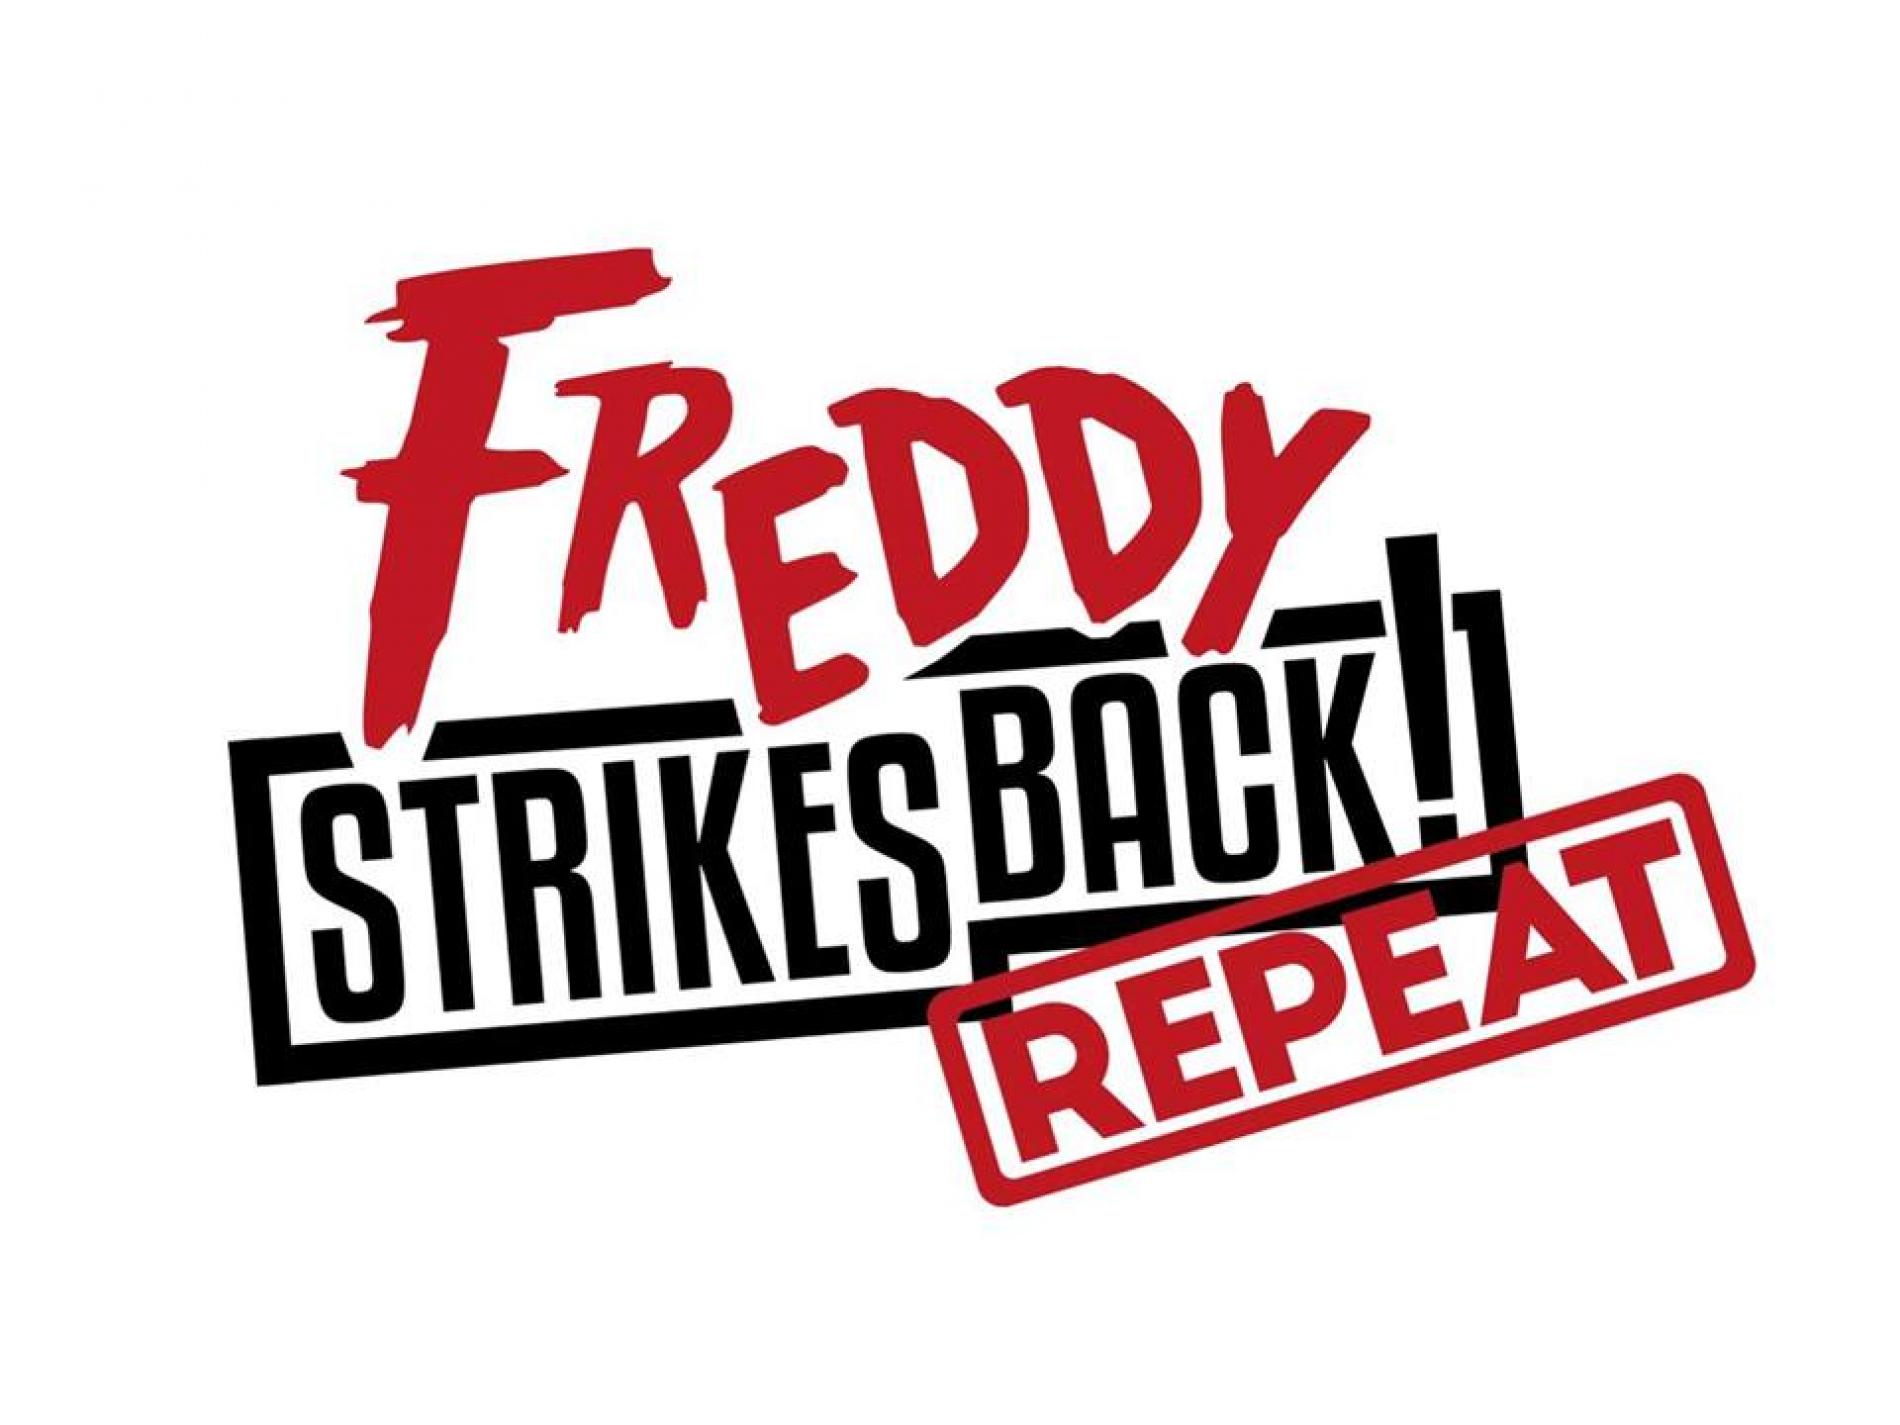 Freddy Strikes Back! – Repeat Show